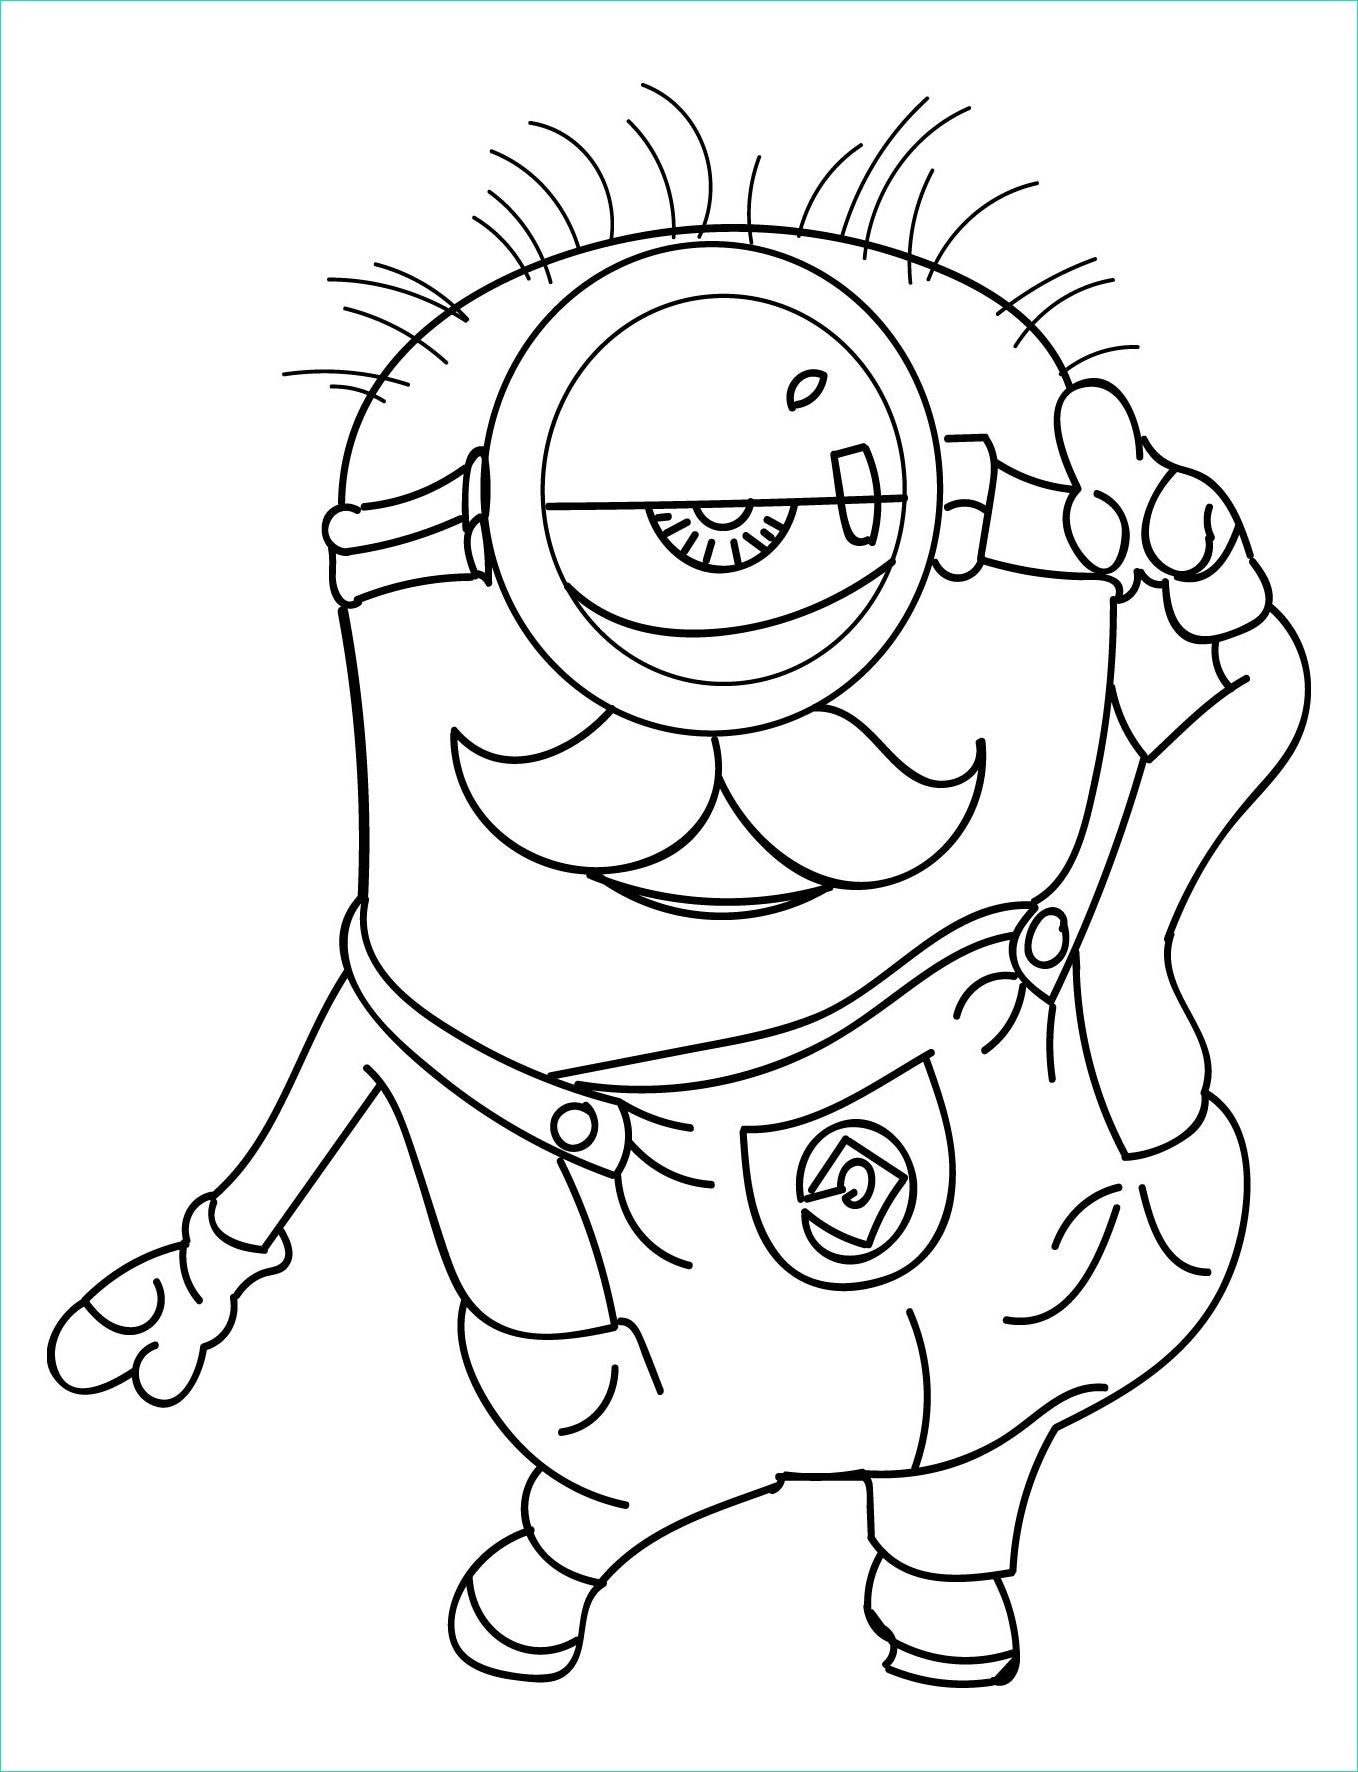 Minions Dessin Impressionnant Image Minions to Color for Kids Minions Kids Coloring Pages